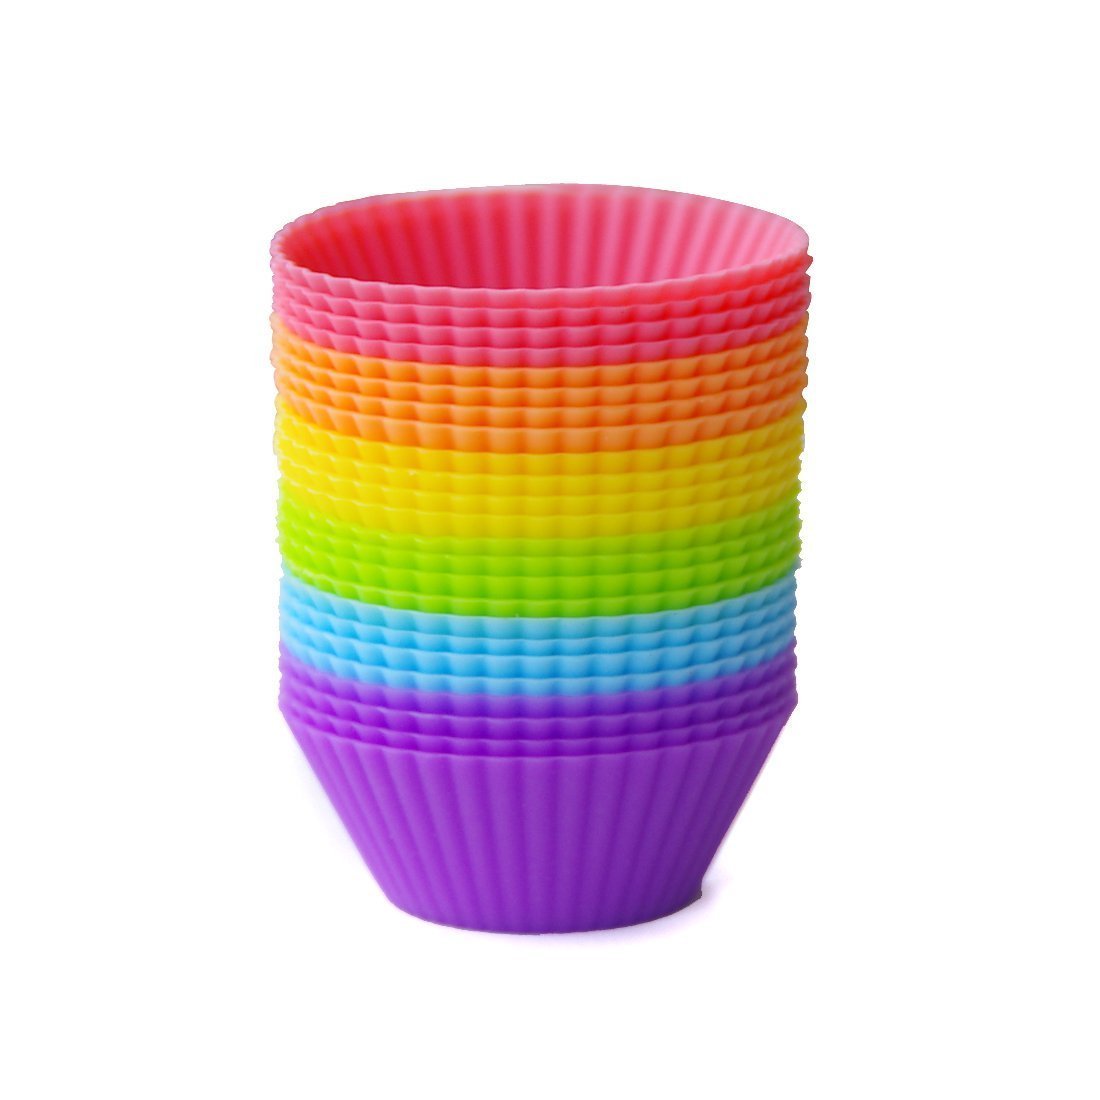 Reusable Silicone Cupcake Liners, 12-pack, Only $4.99!